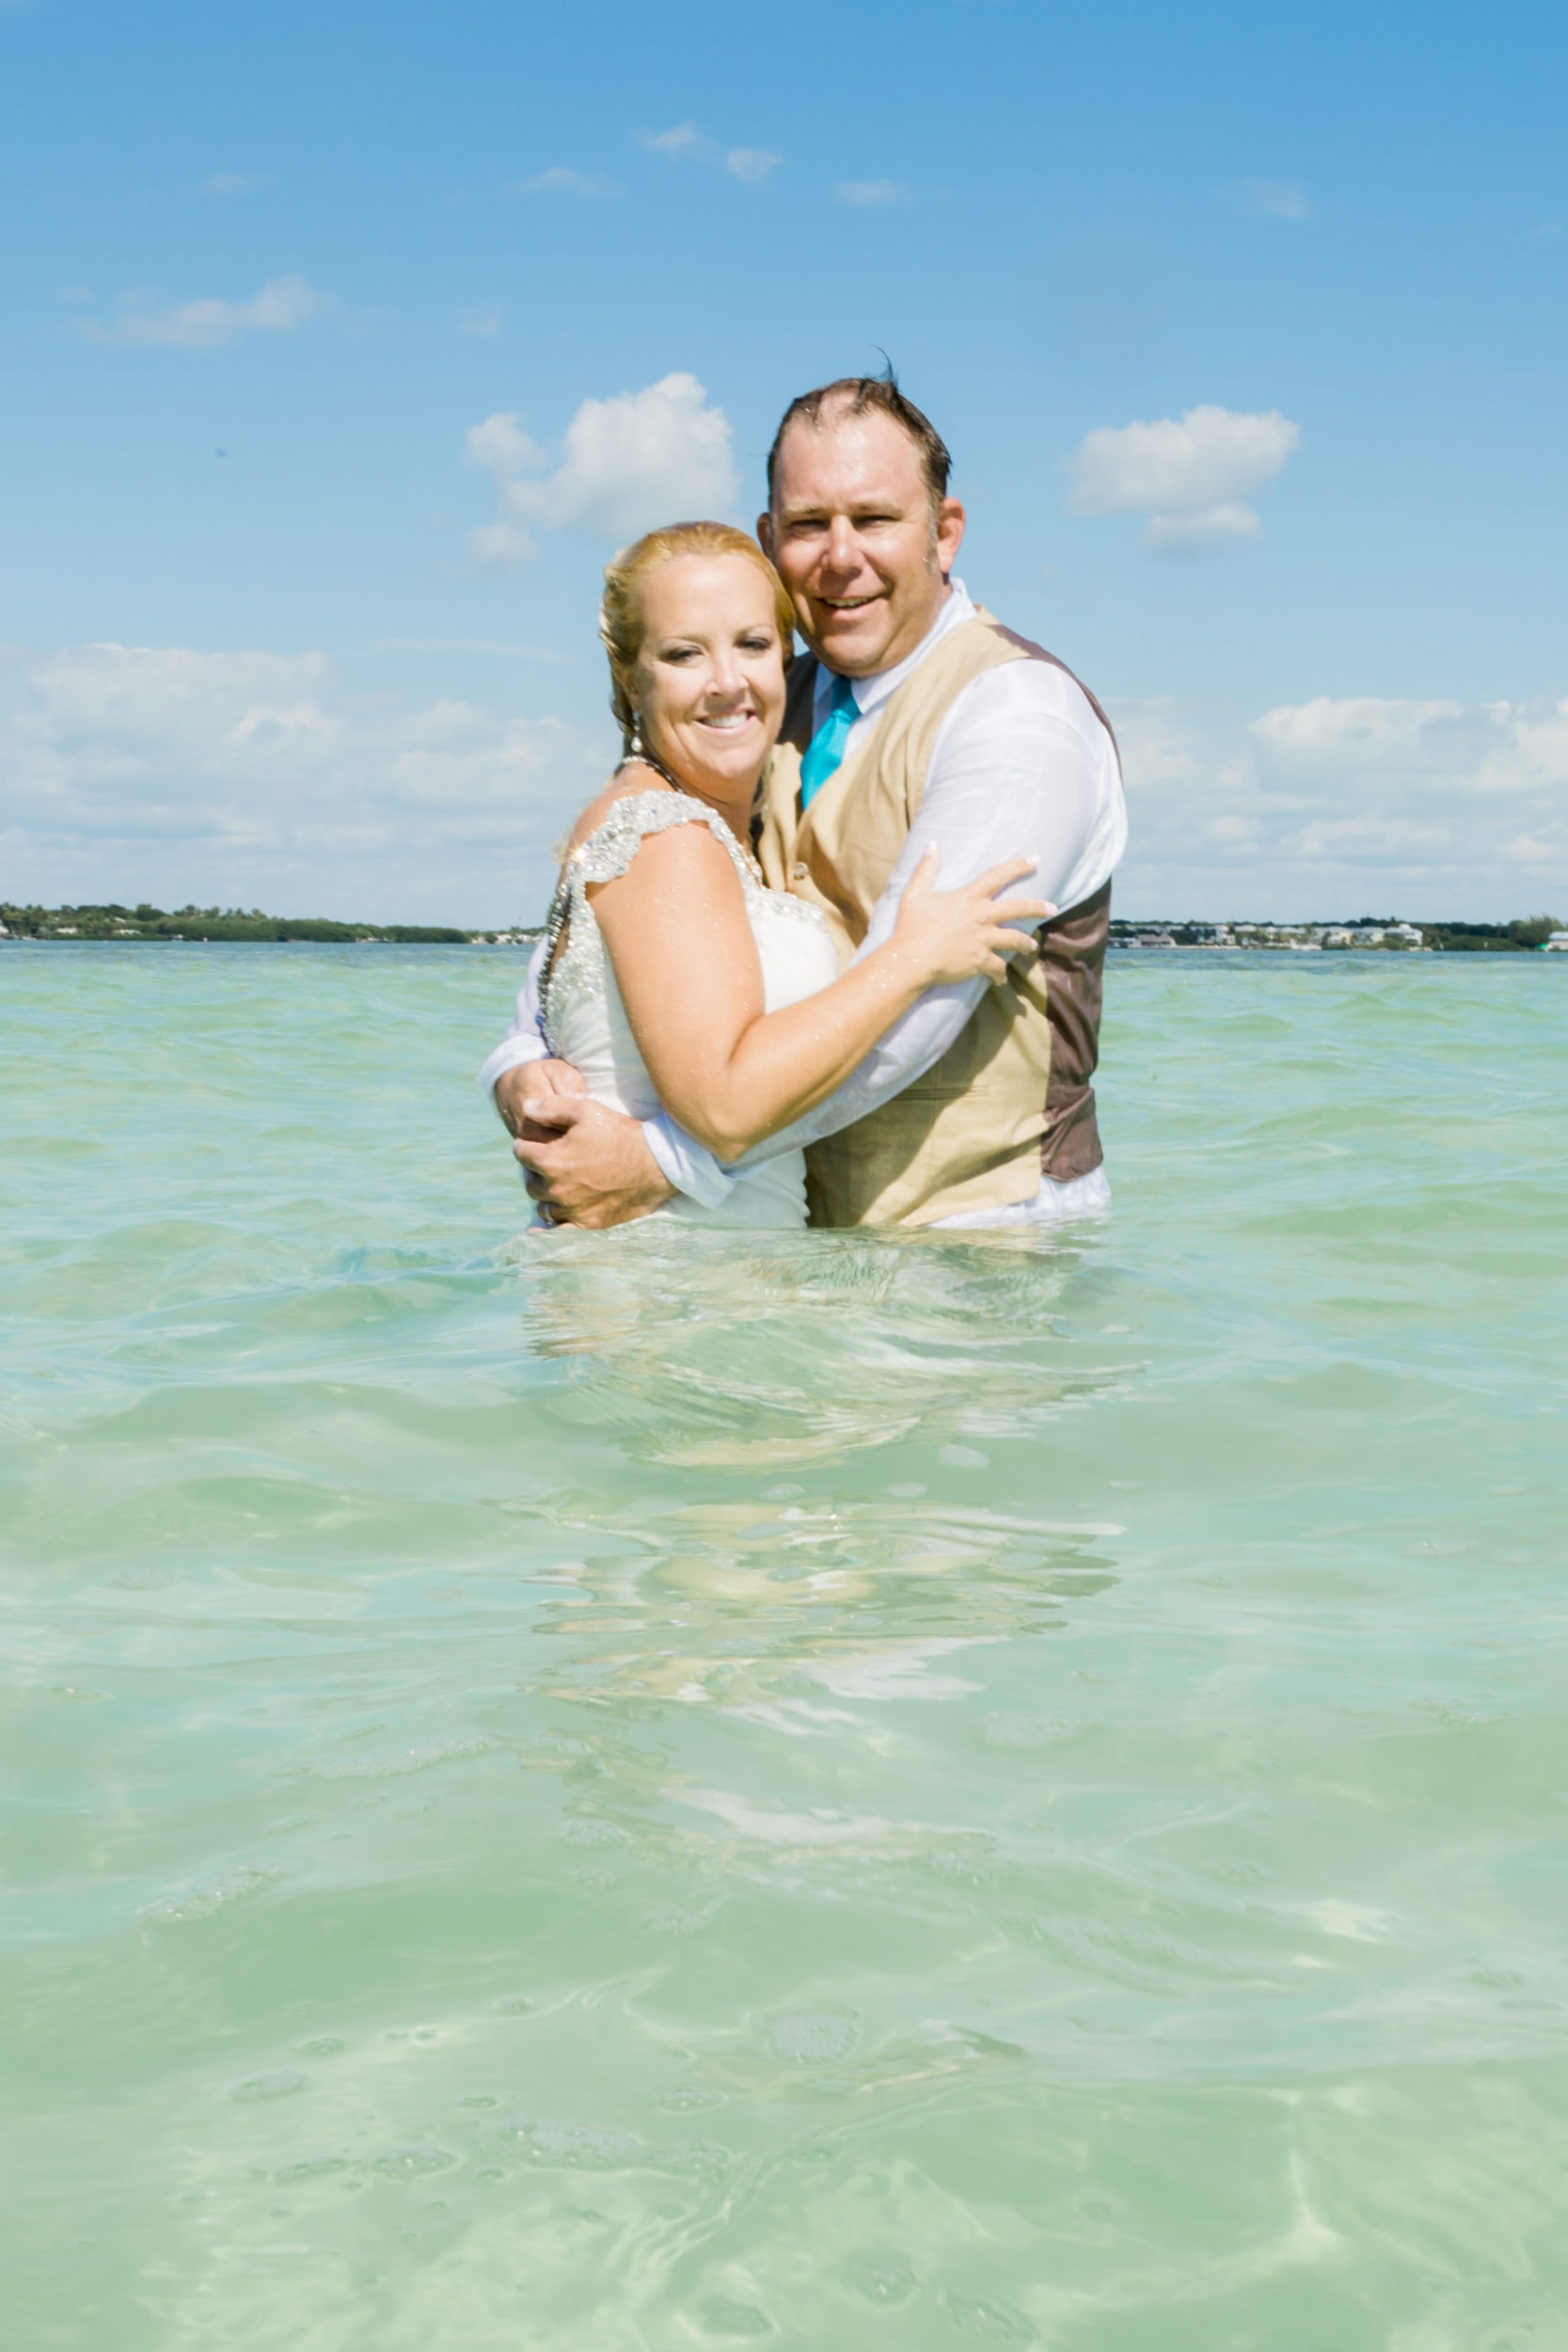 bride with white wet gown with groom with tan suit with teal tie in ocean water at Coconut Cove Resort Wedding